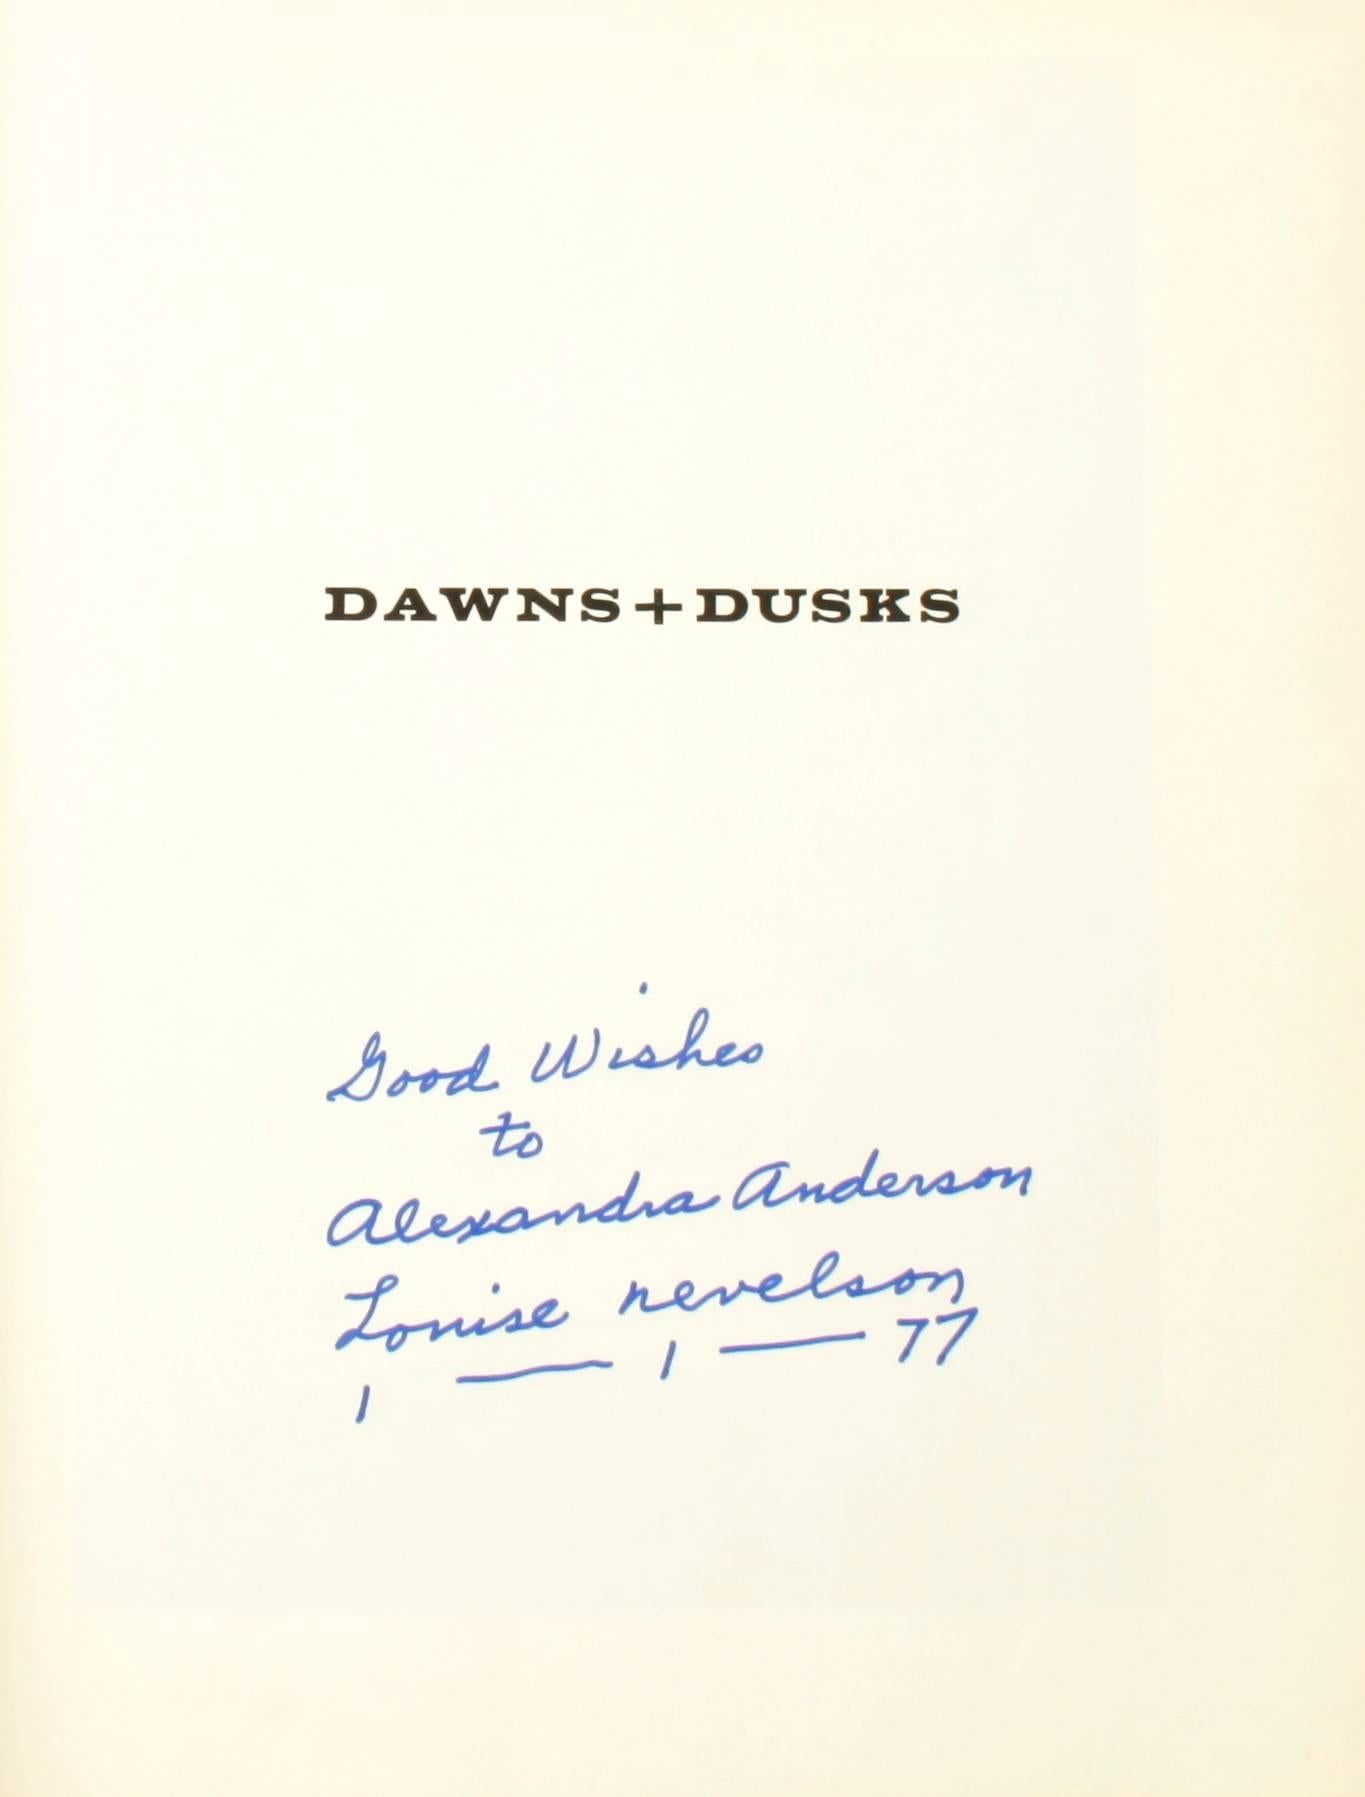 Dawns + Dusks: Taped conversations with Diana MacKown, by Louise Nevelson. Signed by the author and accompanied with a letter from Roy Leaf, former president of Skowhegan School of Painting and Sculpture. Louise Nevelson's memoir, as told to Diana